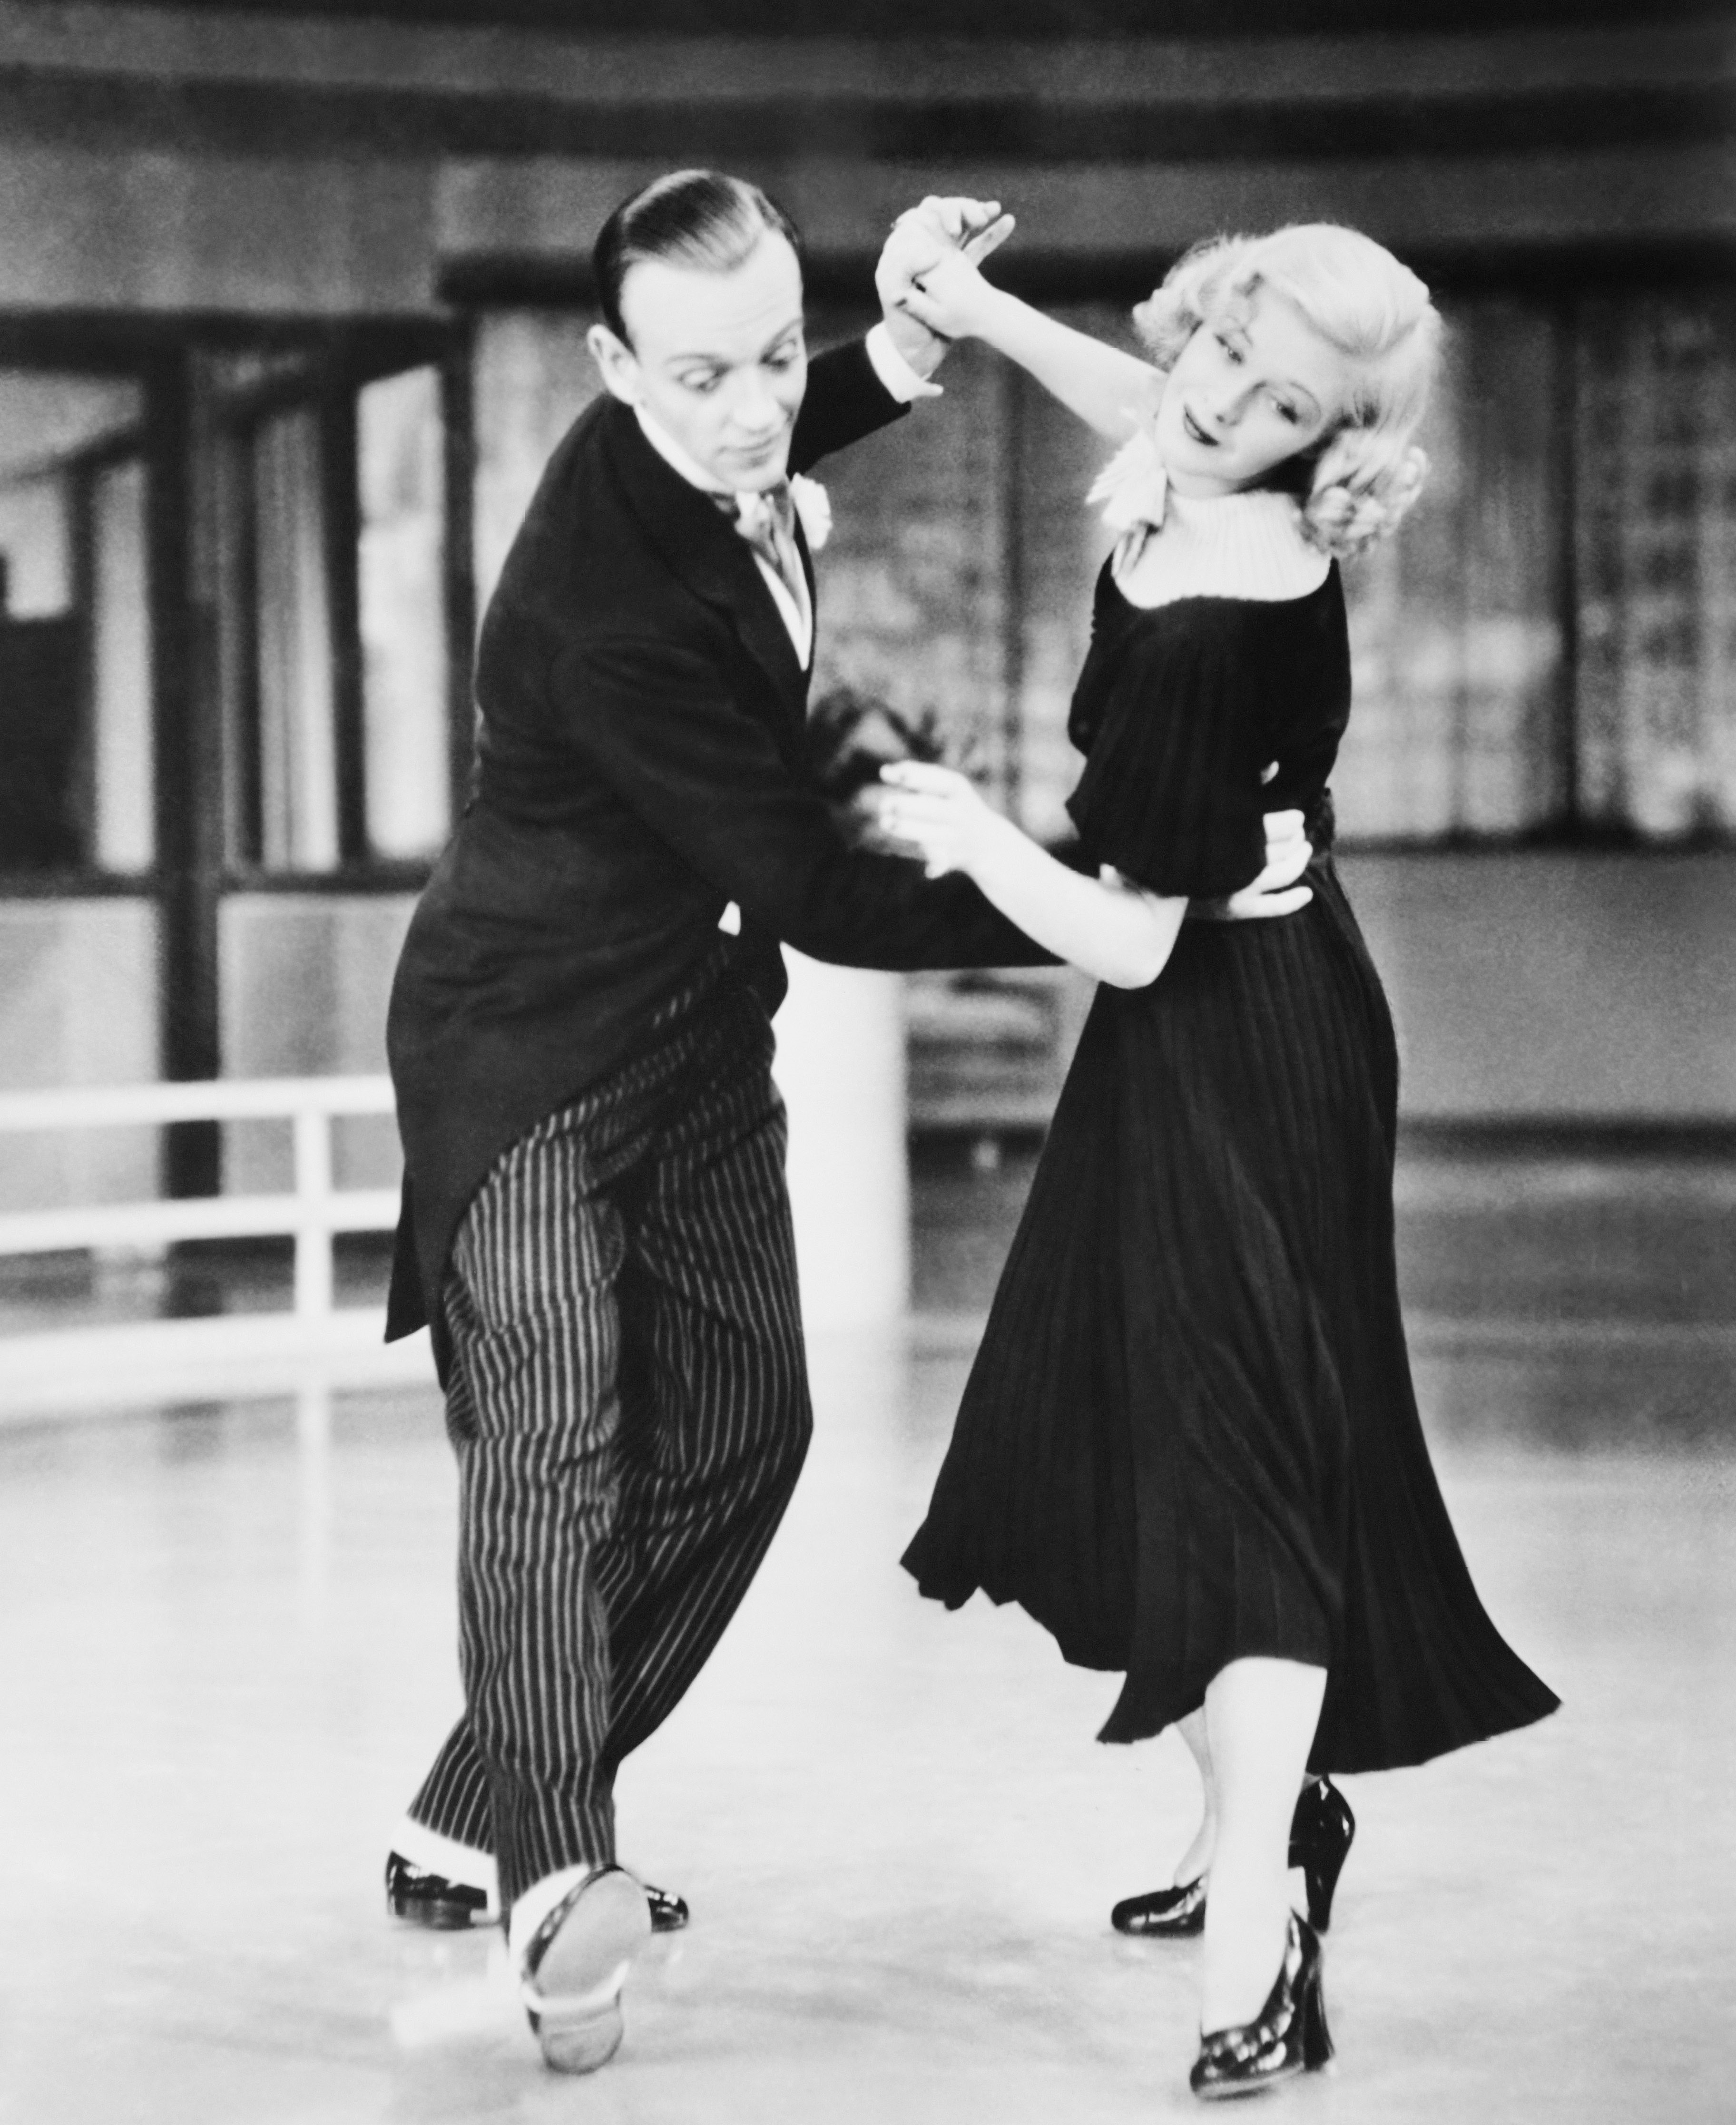 Follie d'inverno di George Stevens, 1936. Fred Astaire e Ginger Rogers